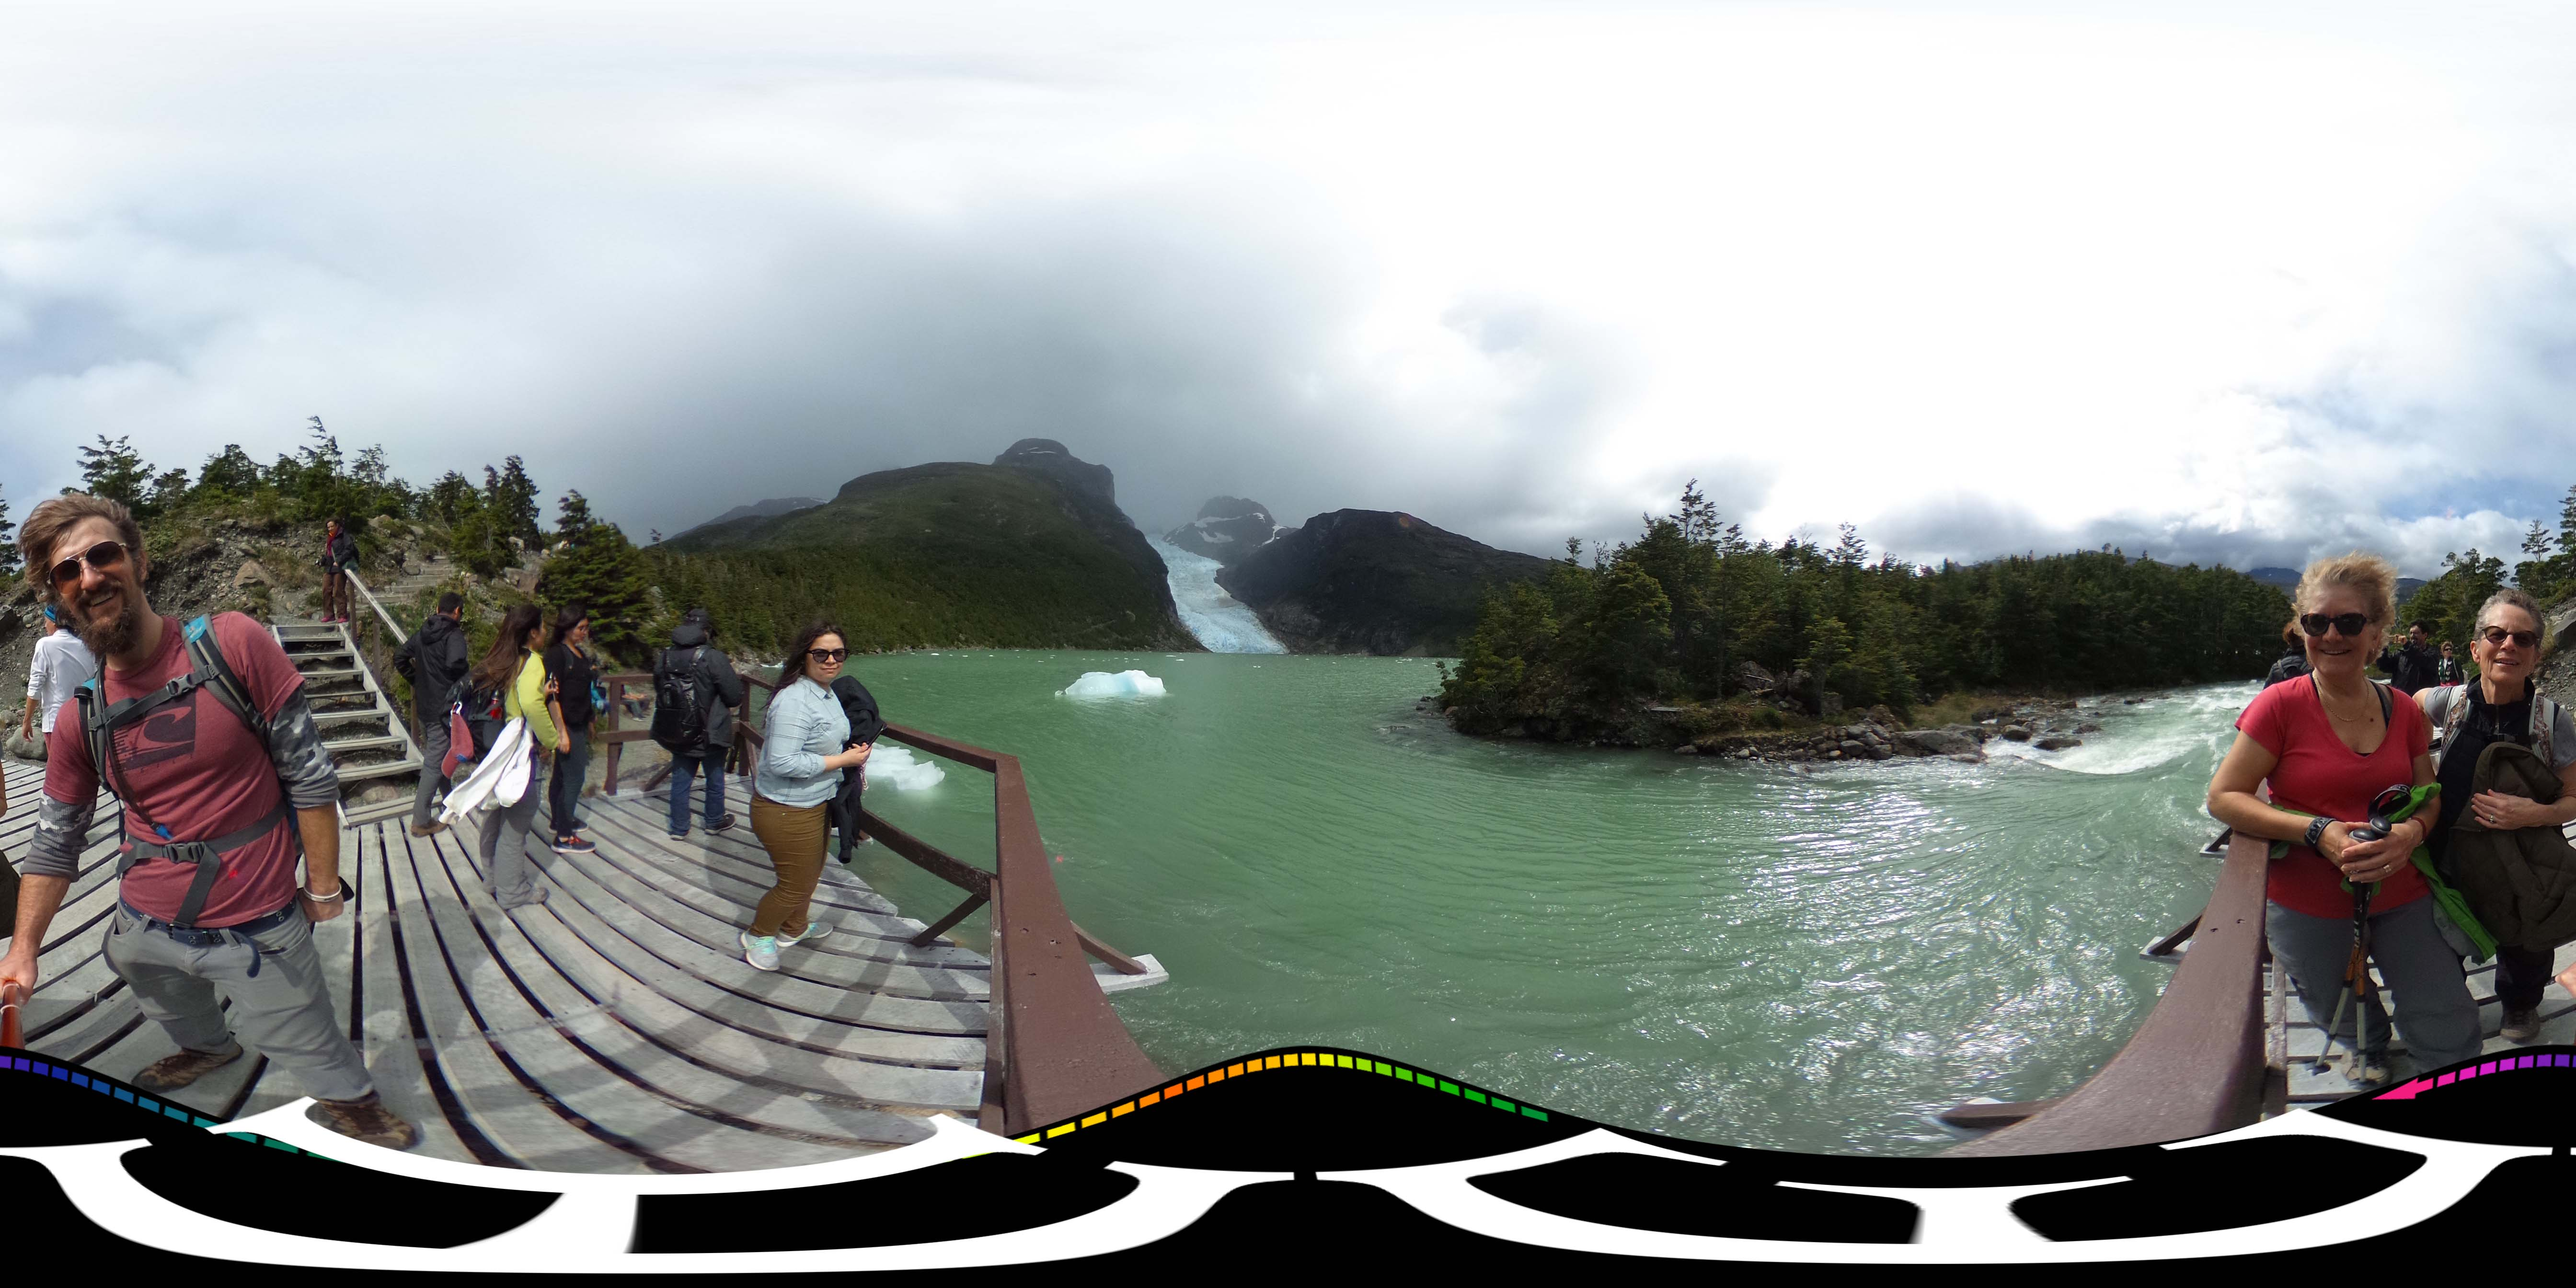 360 degree photosphere image for virtual reality applications.